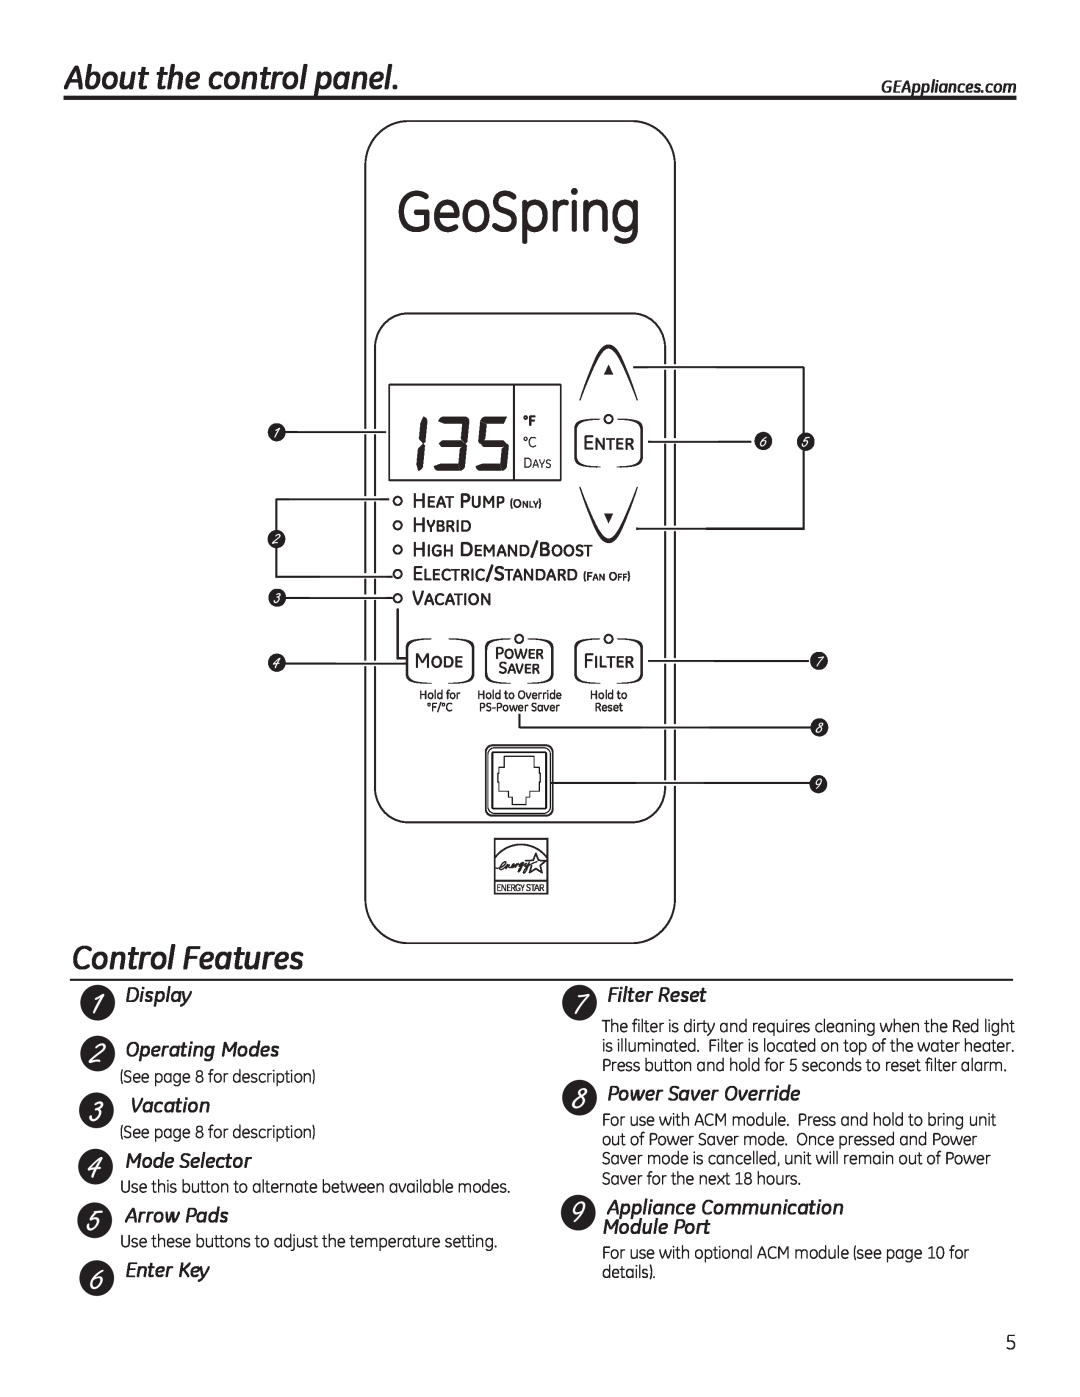 GE GEH50DEED GeoSpring, About the control panel. , Control Features, Display Operating Modes, Vacation, Mode Selector 